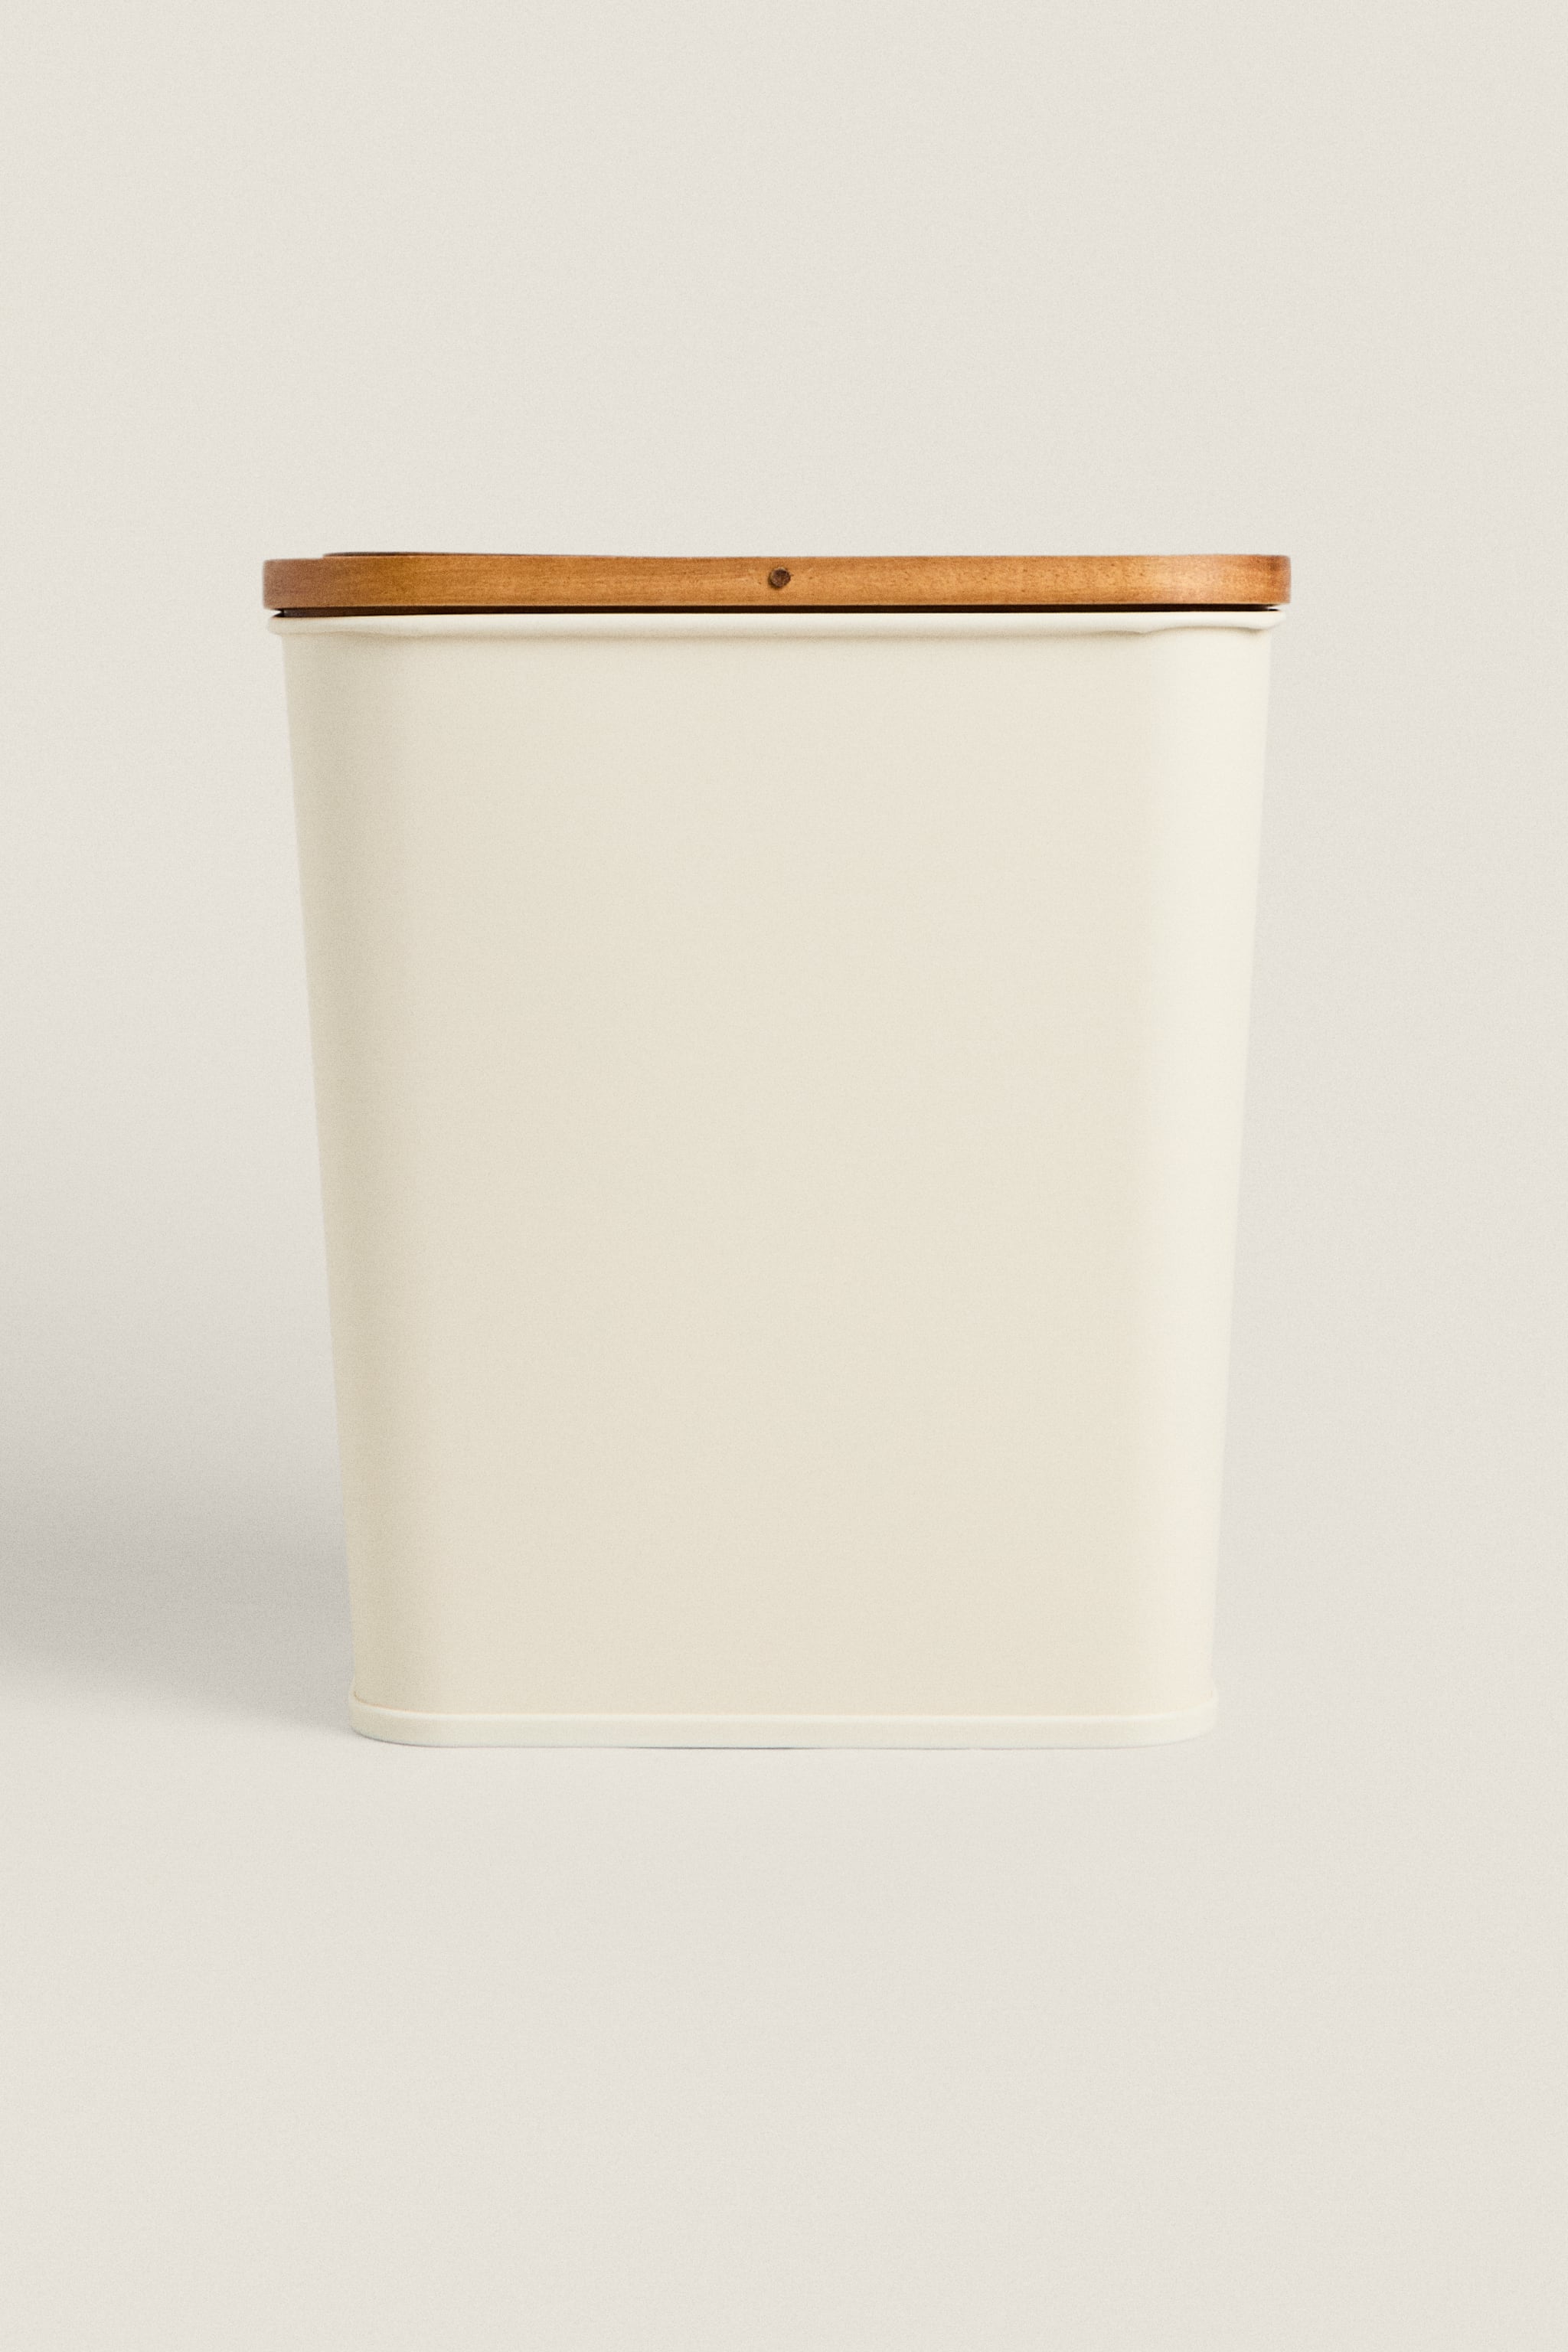 LACQUERED METAL KITCHEN TRASH CAN